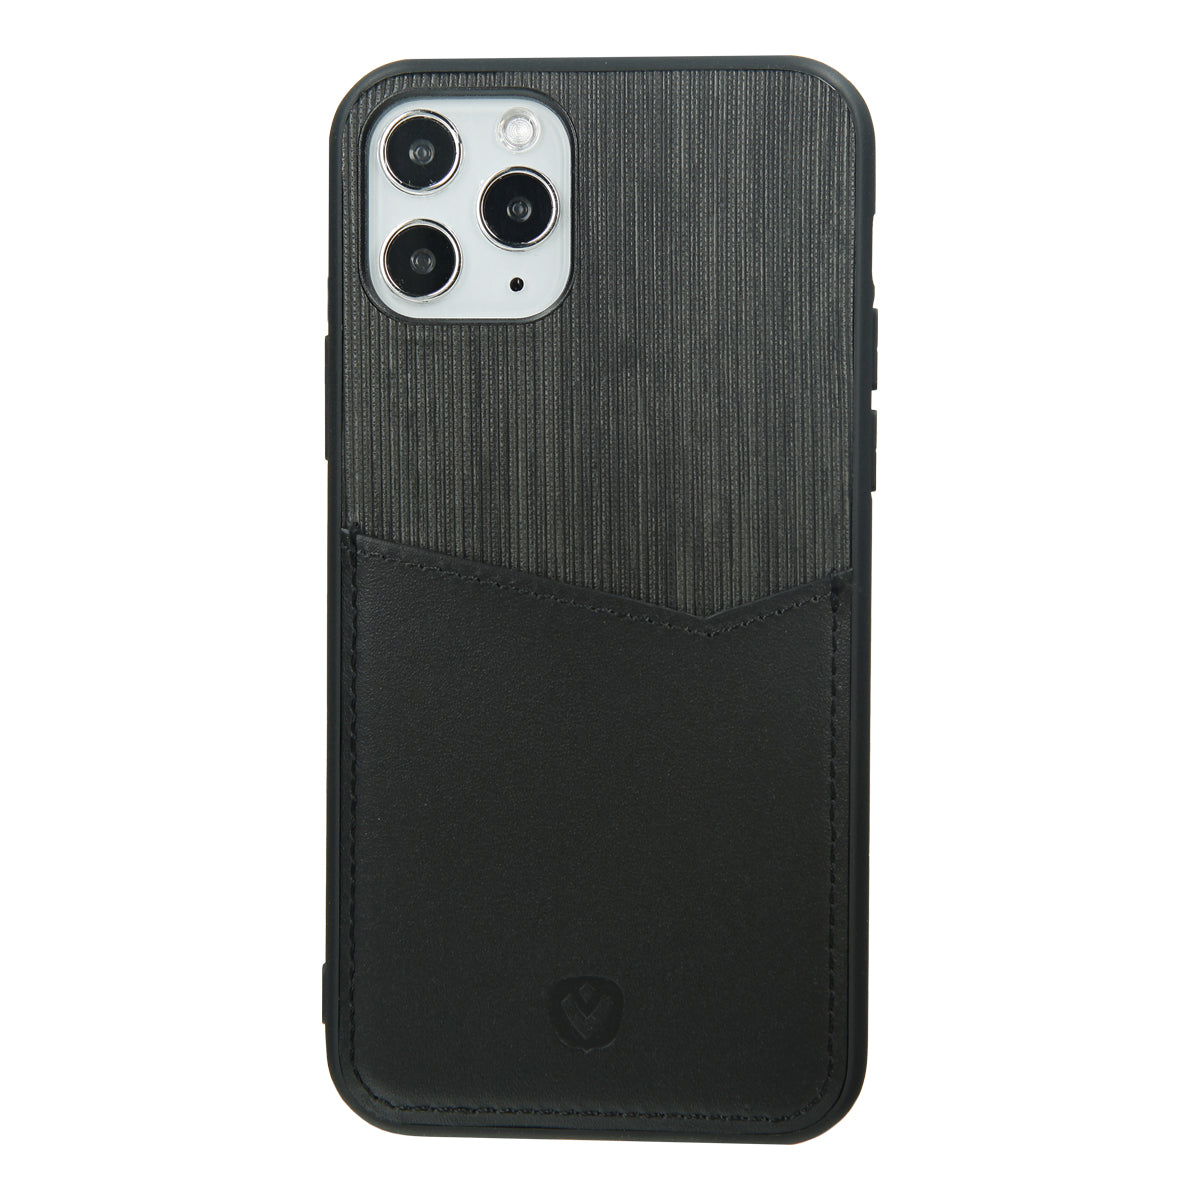 Back Cover Card Slot Black iPhone 11 Pro Max